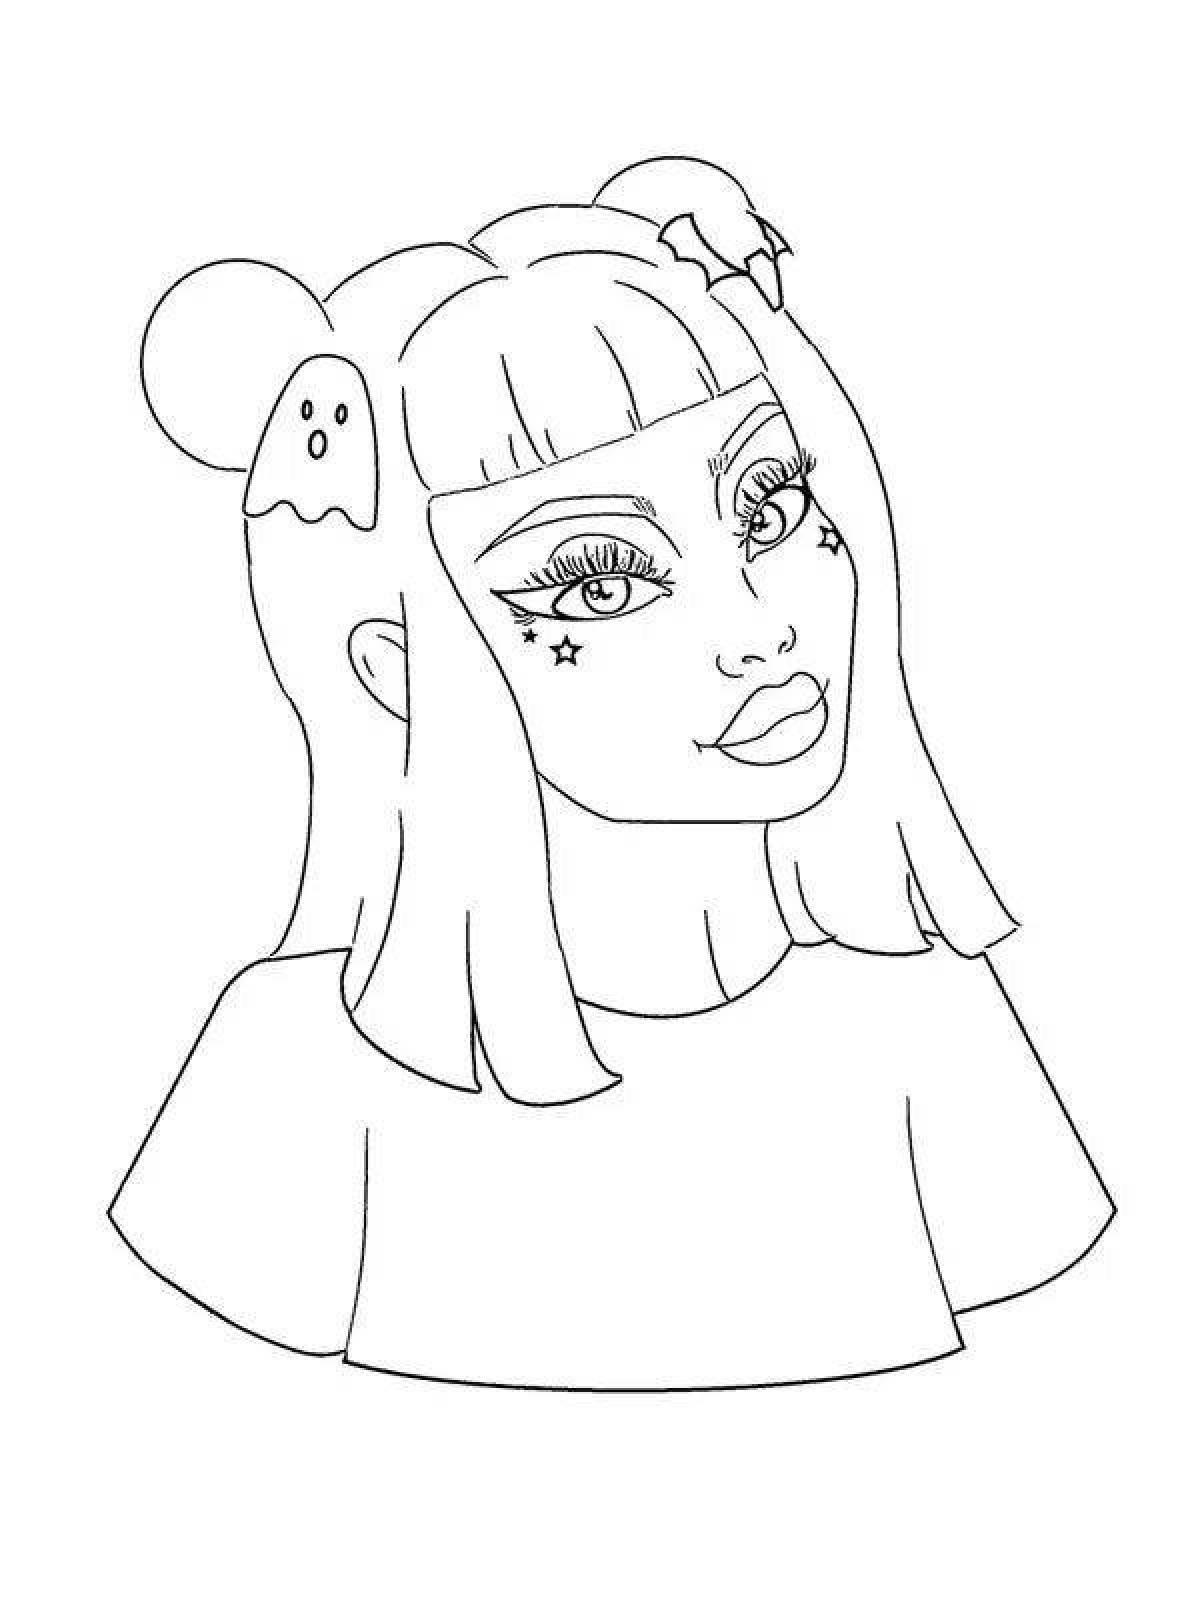 Colorful make-up to do coloring page